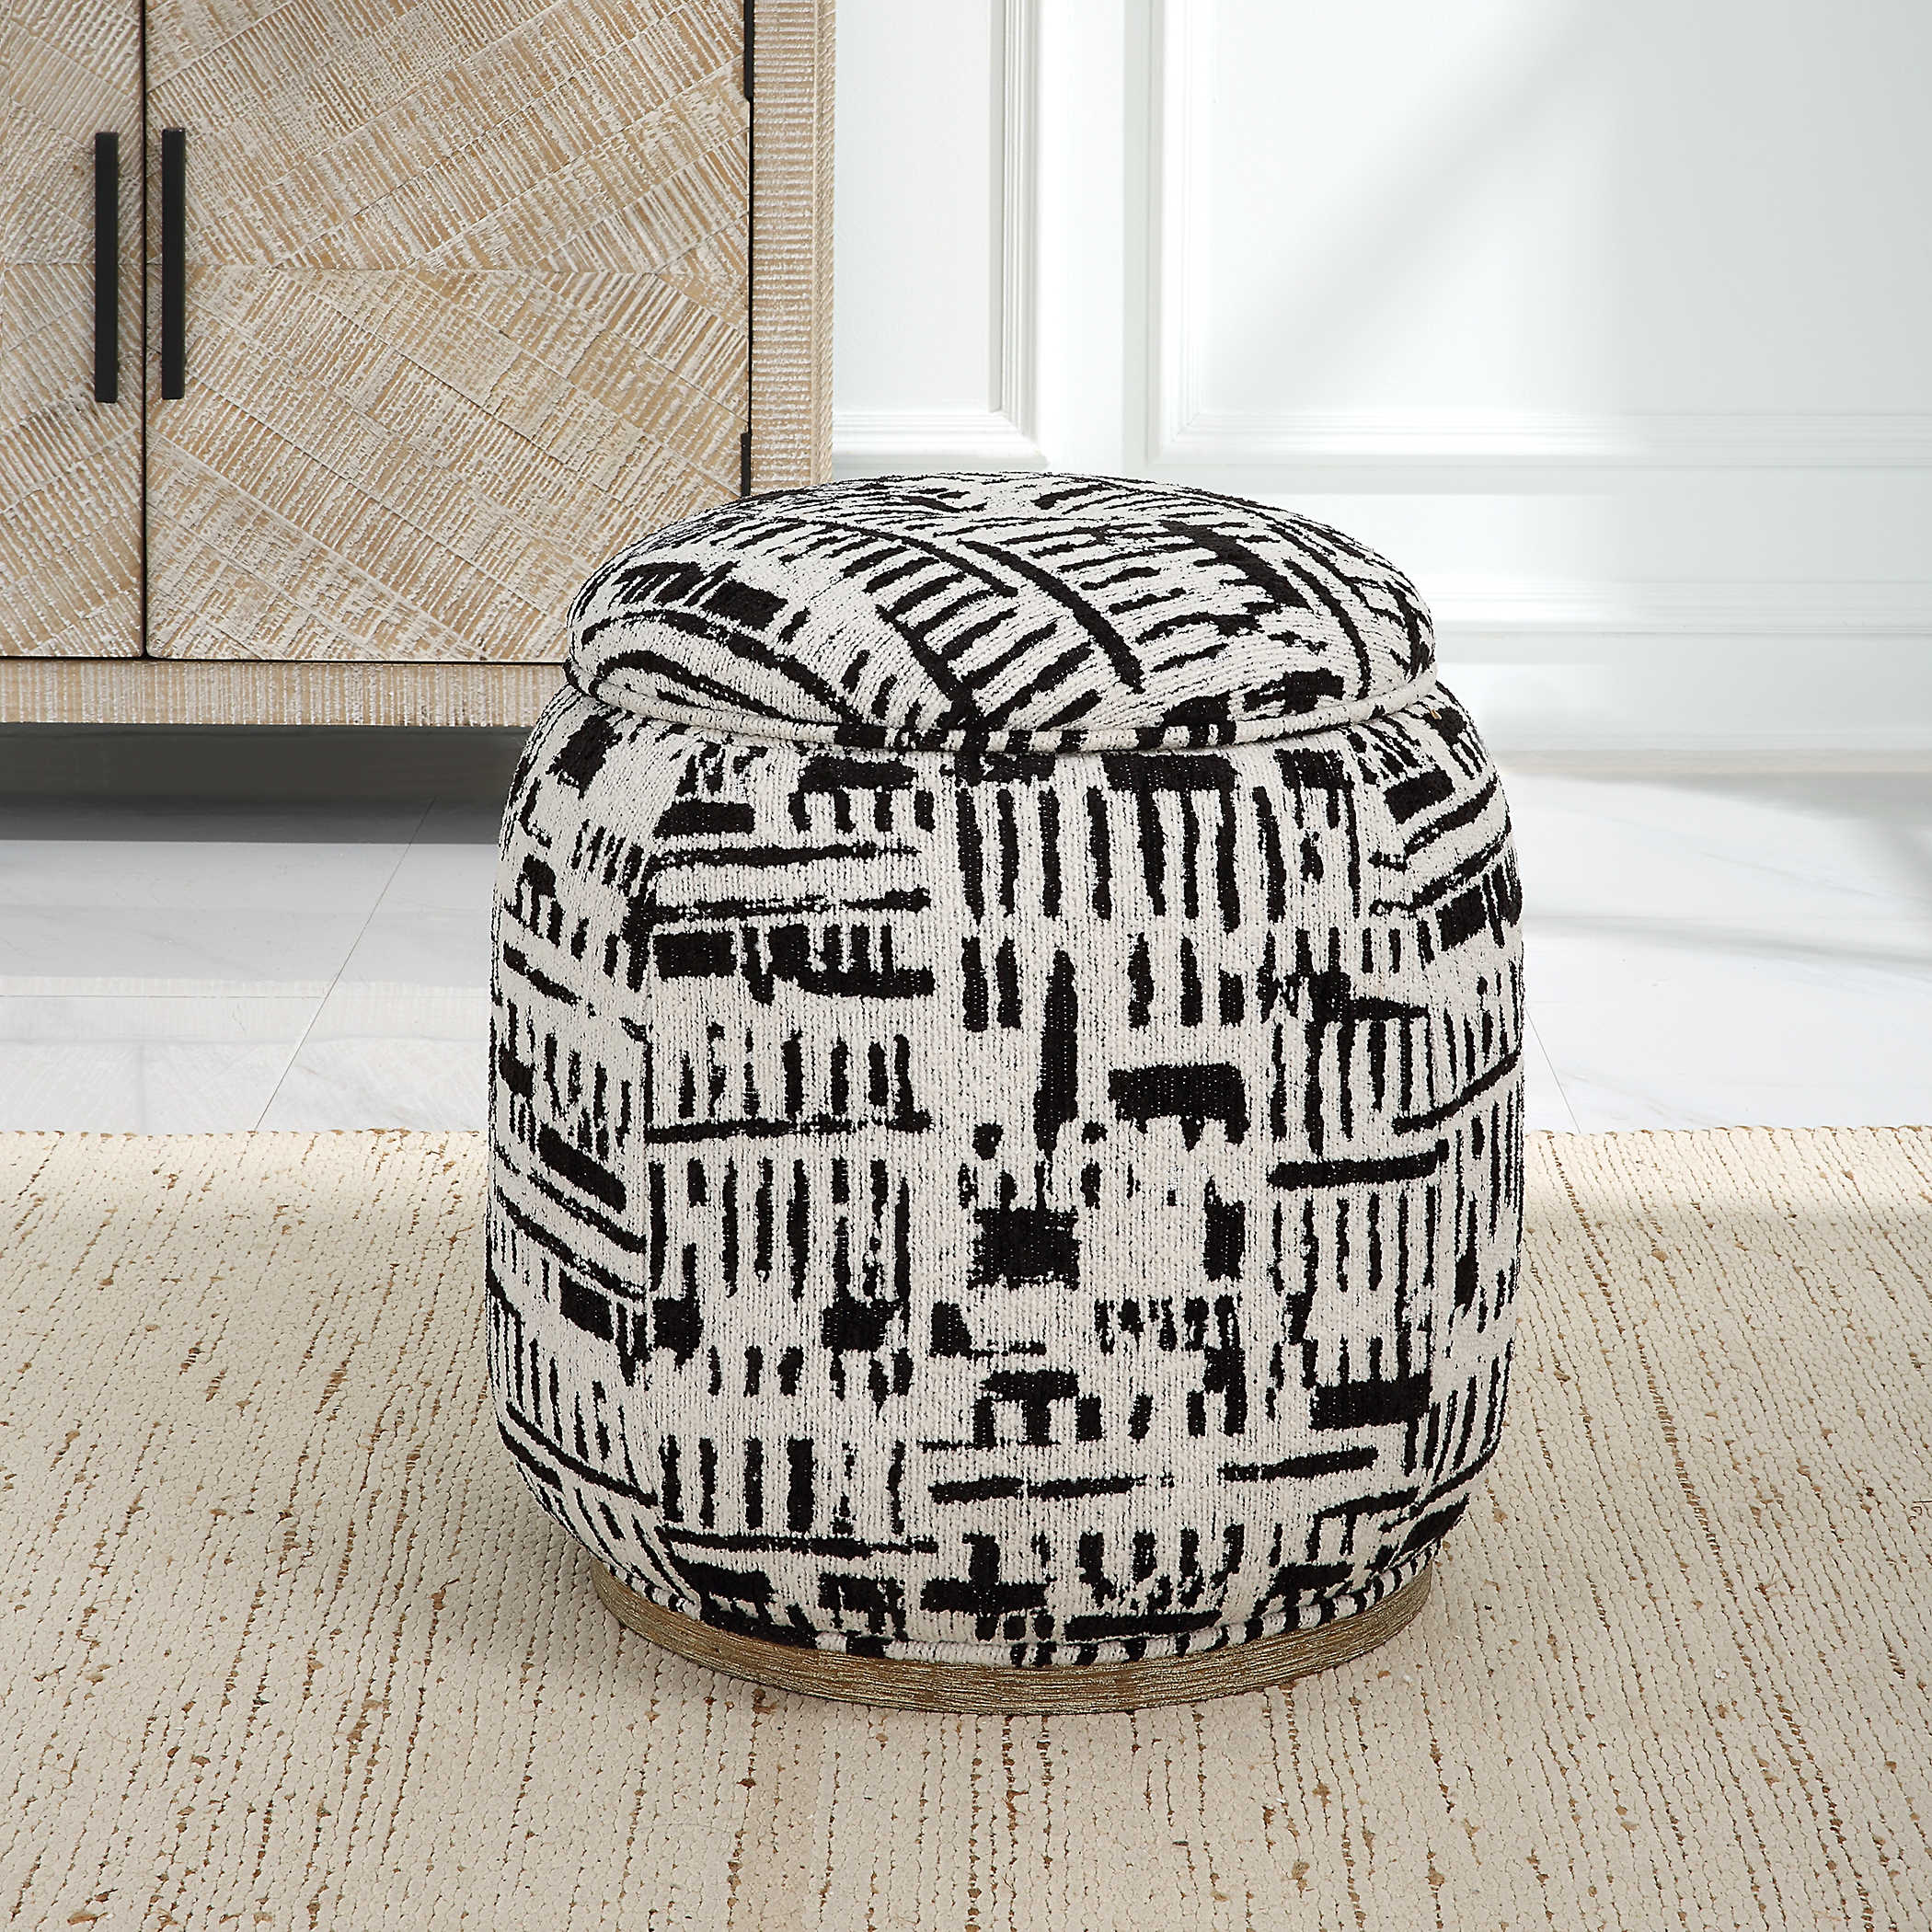 Ottomans are perfect for decorating kids' spaces.